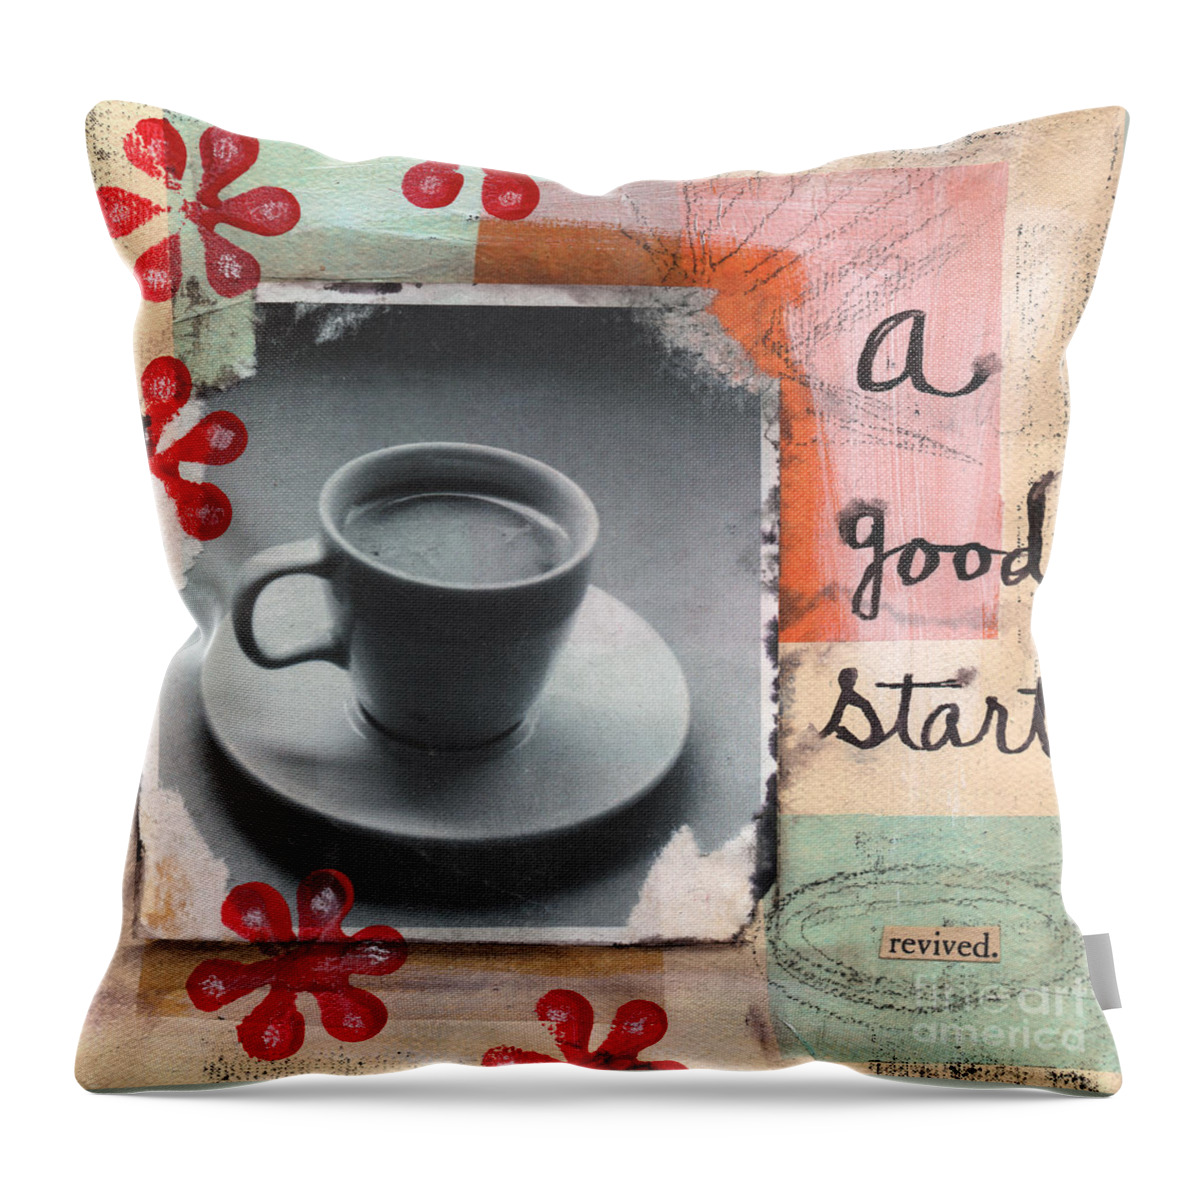 Coffee Throw Pillow featuring the mixed media A Good Start by Linda Woods